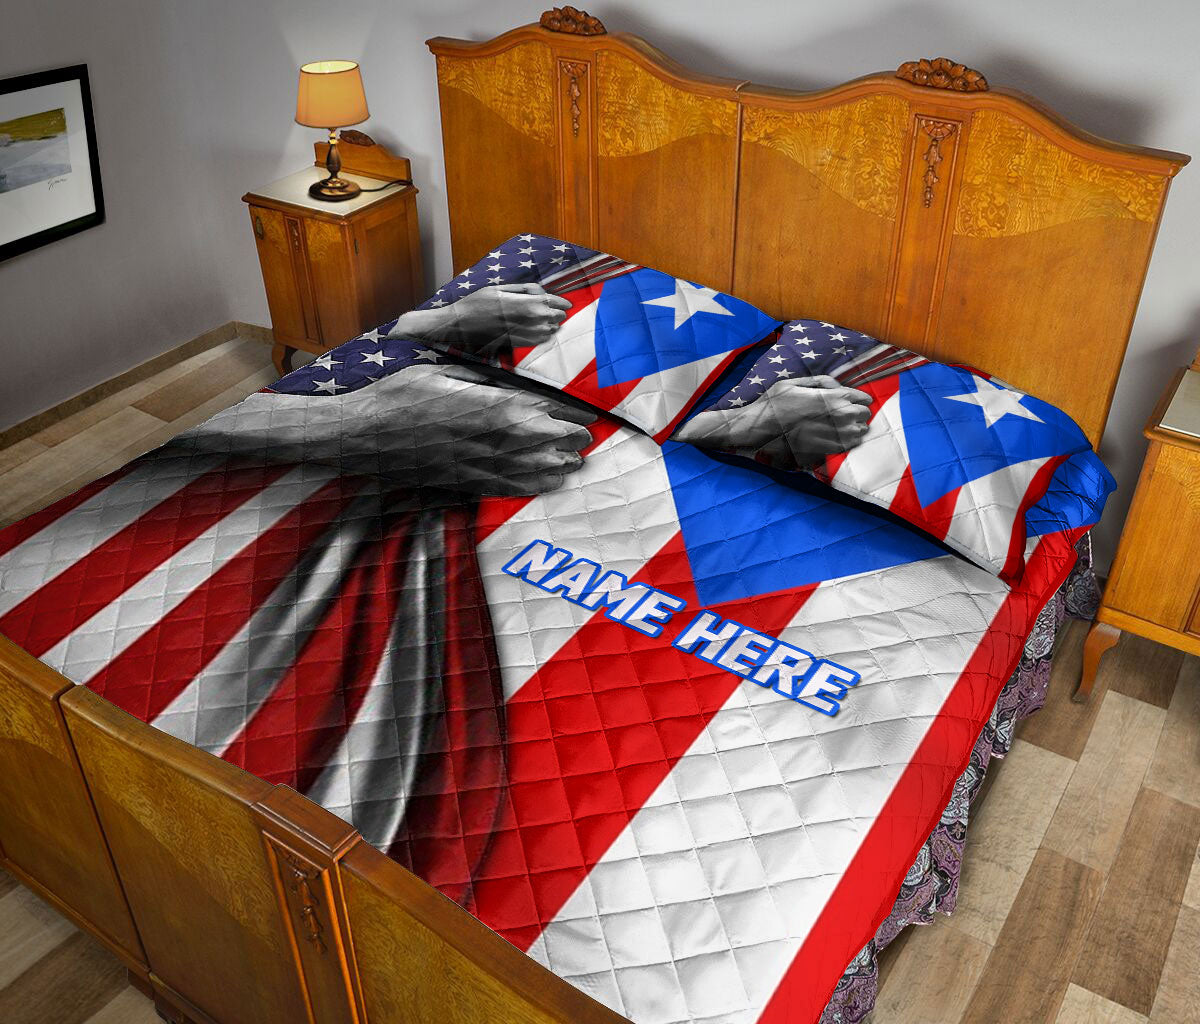 Ohaprints-Quilt-Bed-Set-Pillowcase-Puerto-Rico-Flag-Striped-Star-American-Us-Flag-Custom-Personalized-Name-Blanket-Bedspread-Bedding-2697-Queen (80'' x 90'')